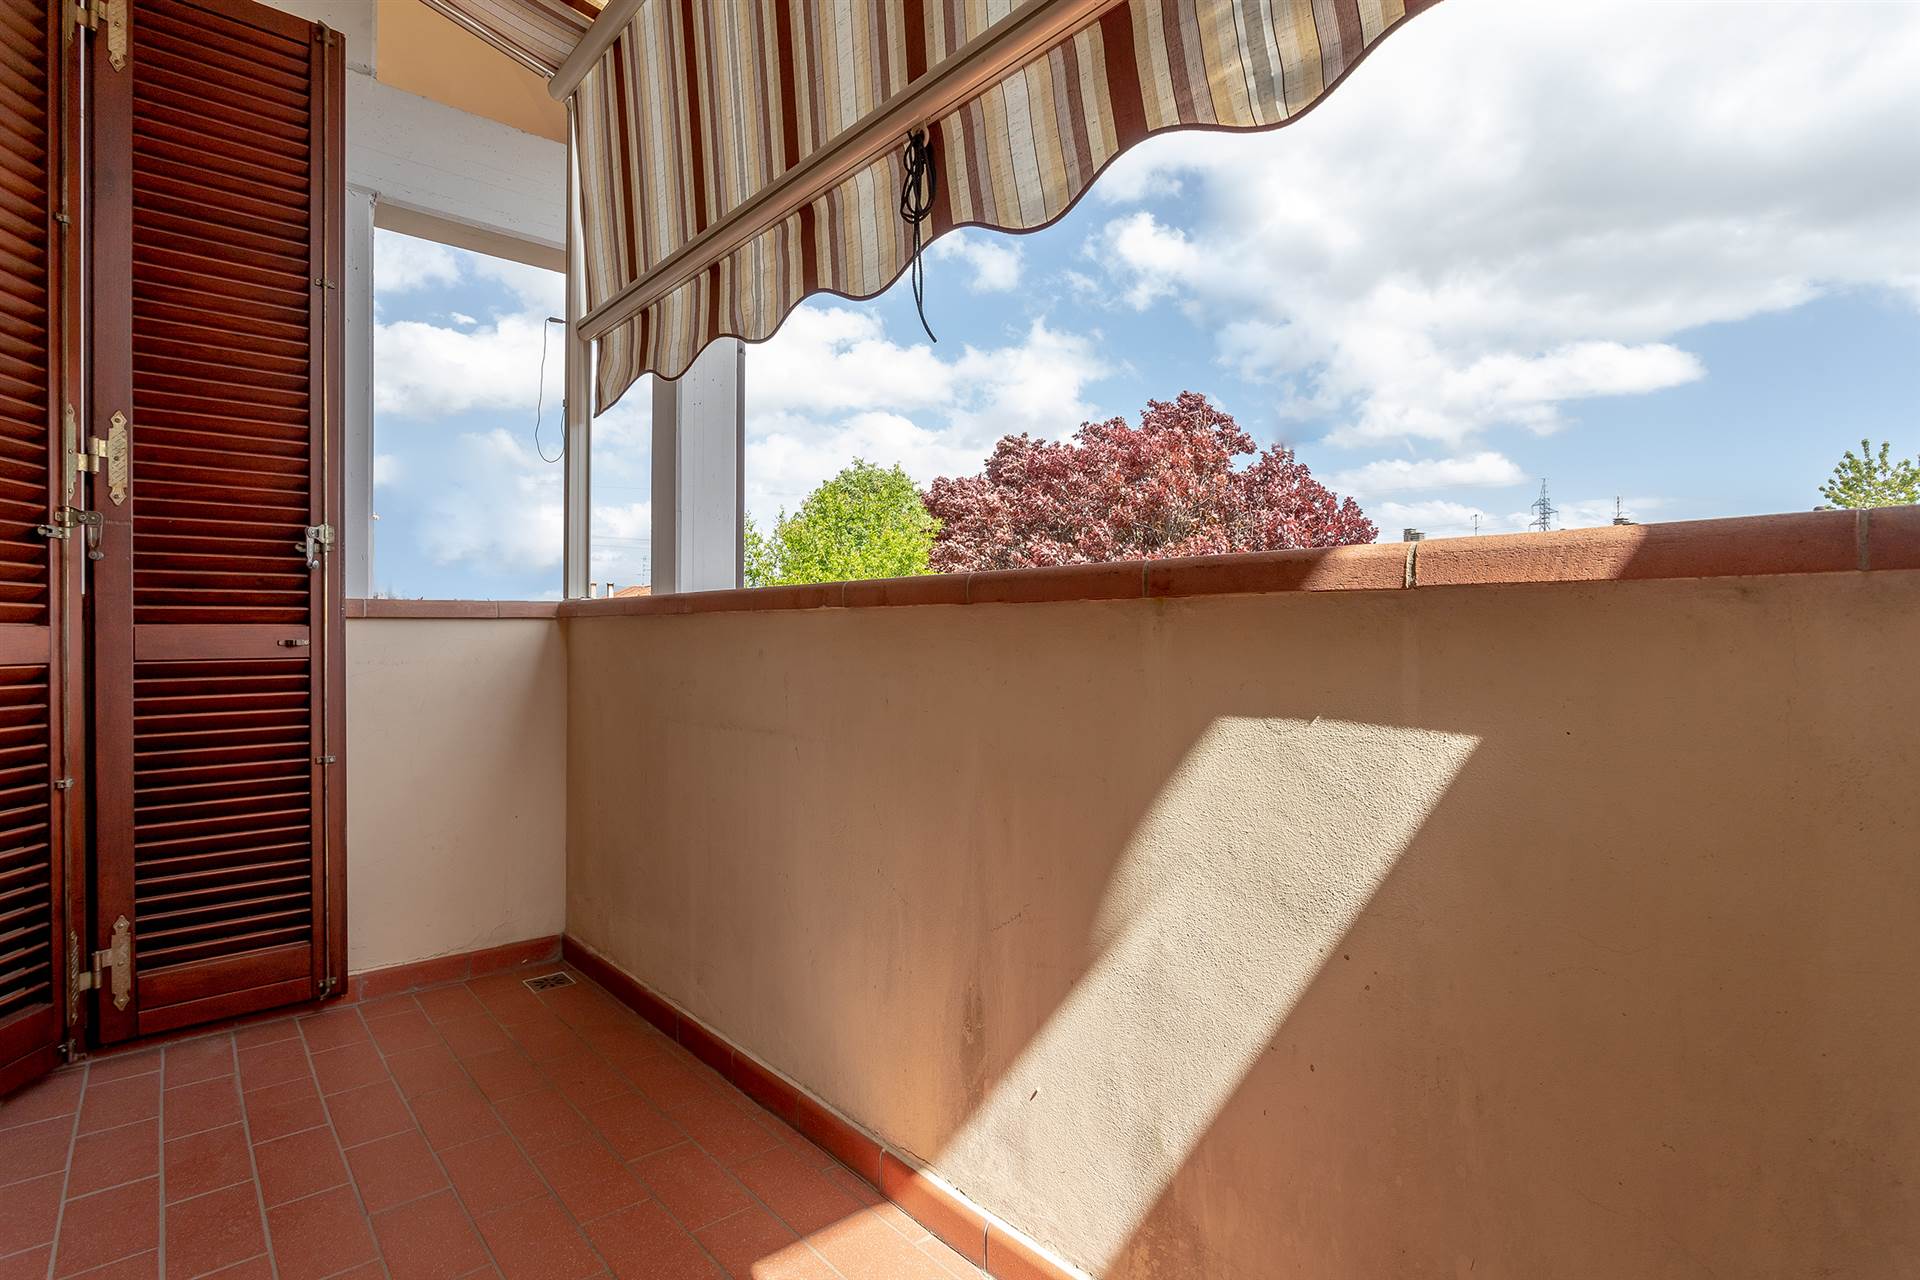 SEANO, CARMIGNANO, Apartment for sale of 58 Sq. mt., Excellent Condition, Heating Individual heating system, Energetic class: E, Epi: 110,836 kwh/m2 